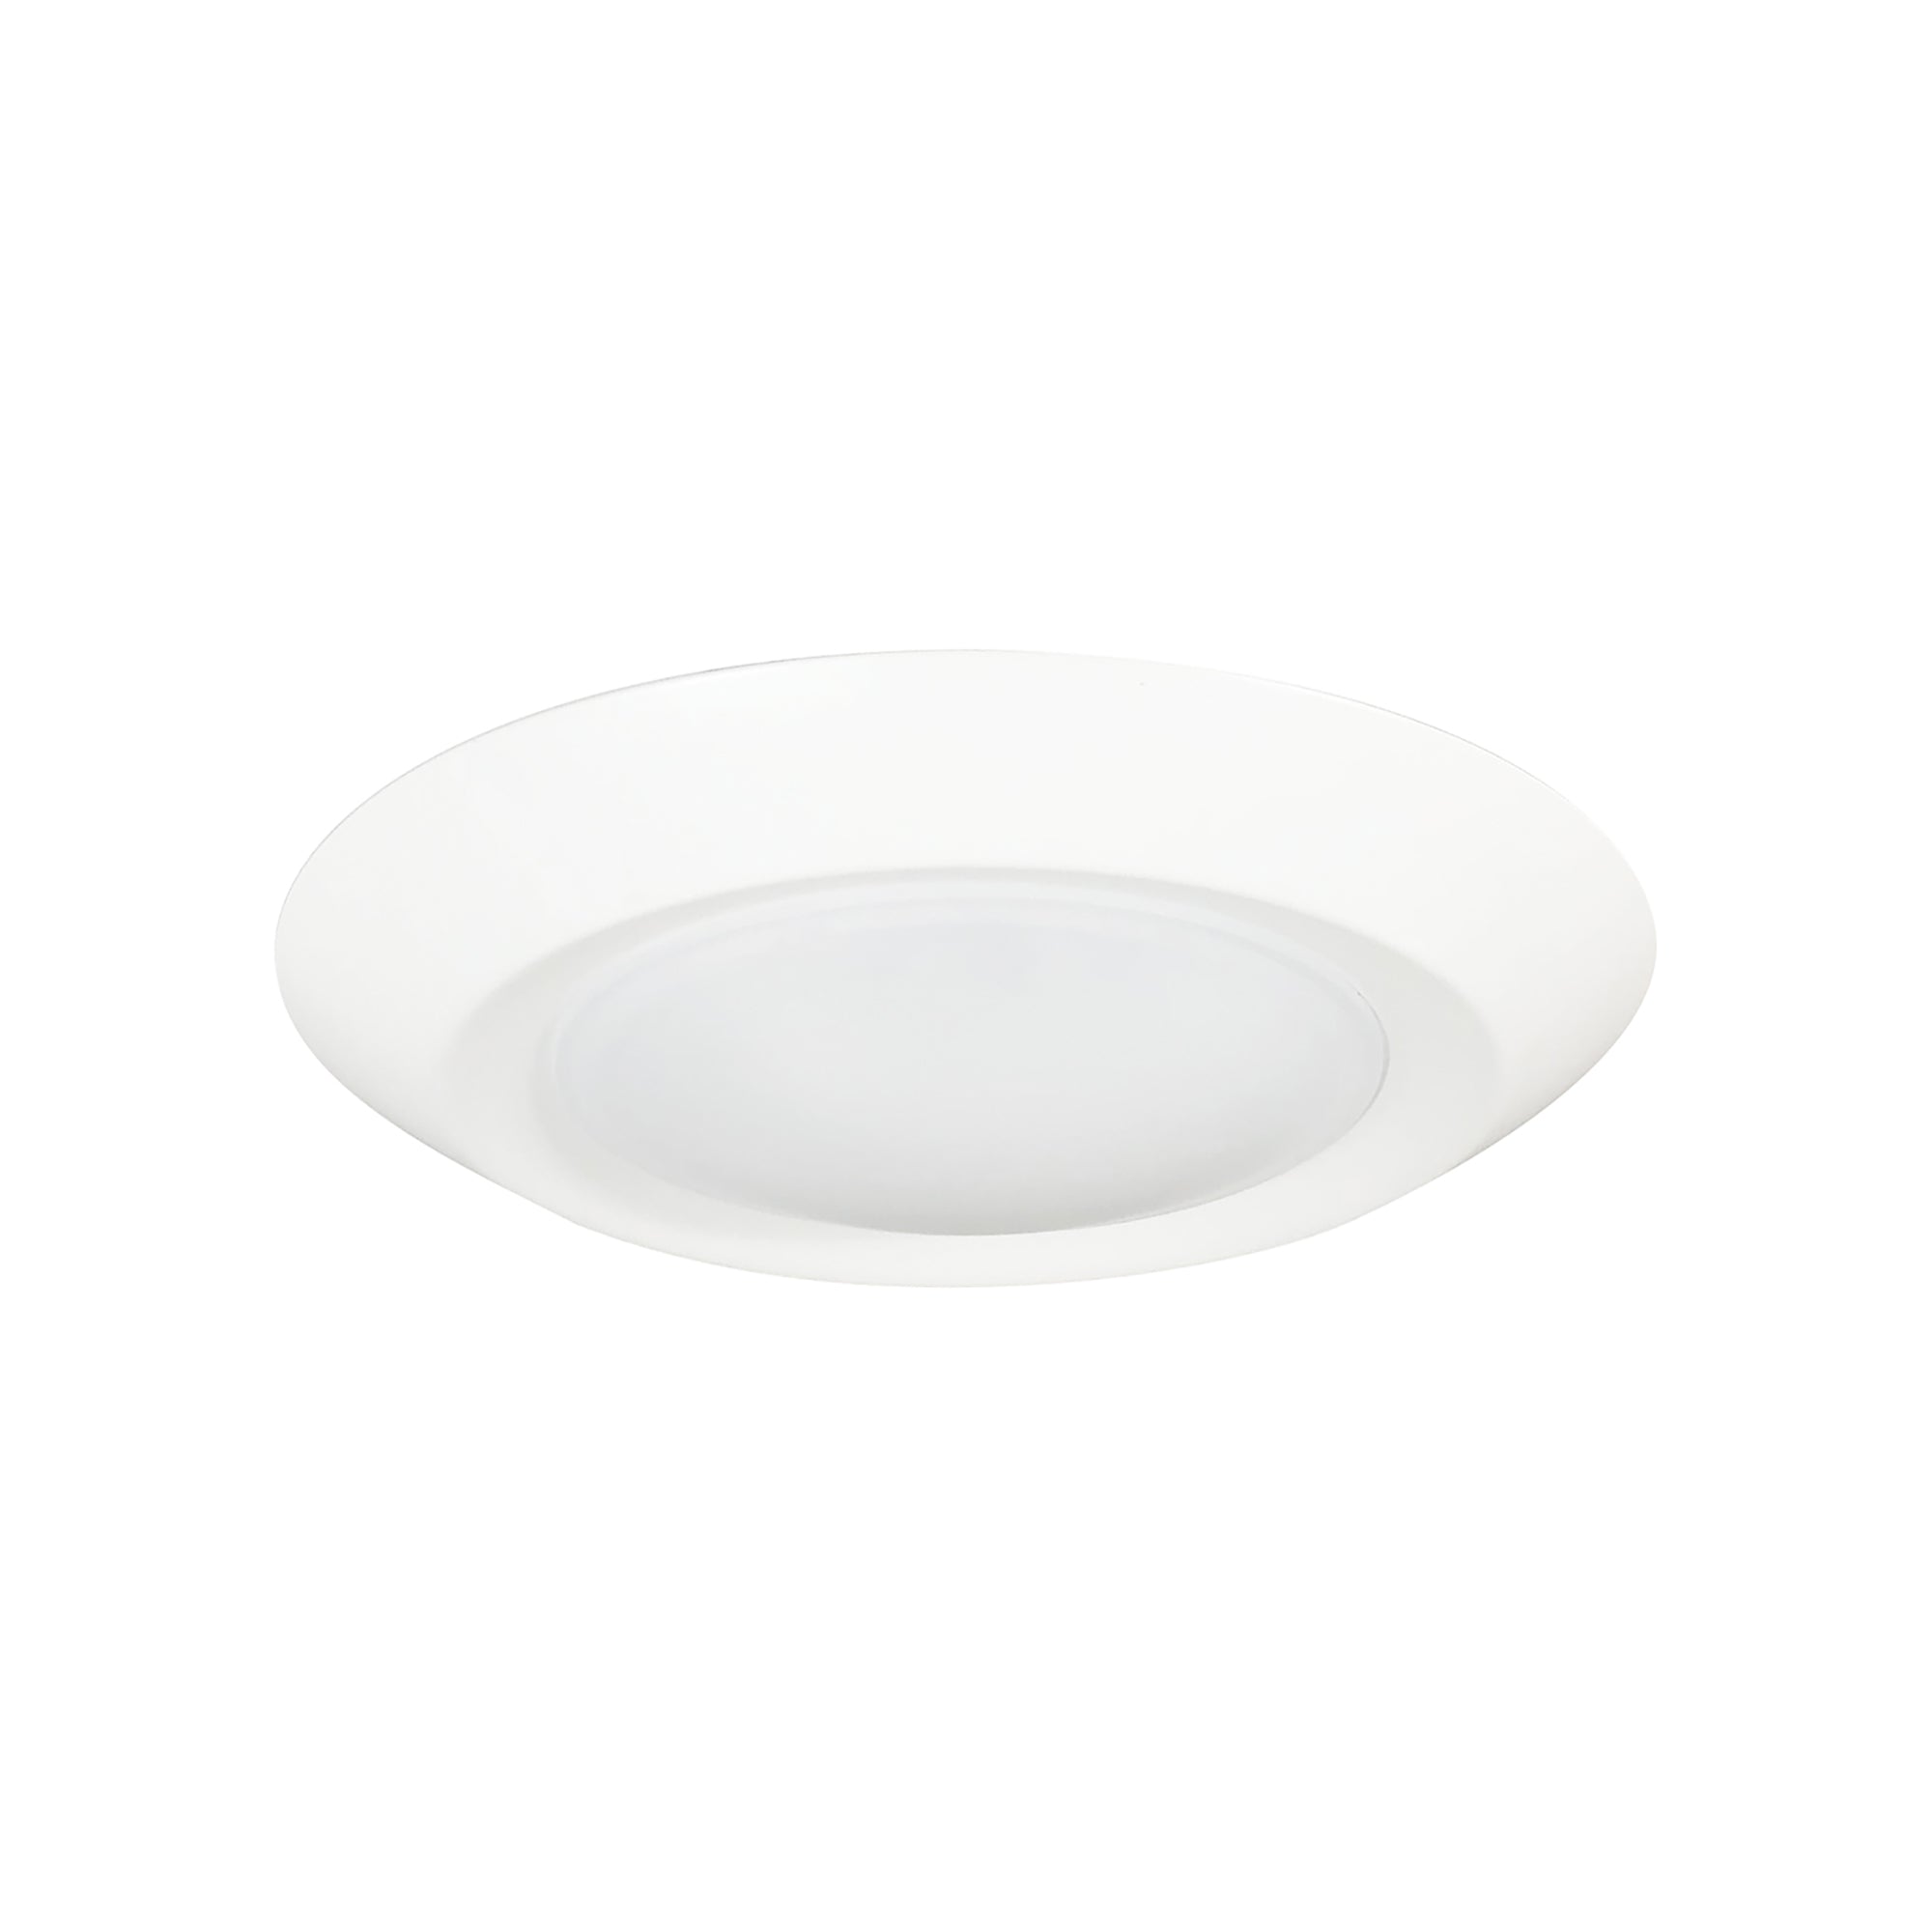 Nora Lighting NLOPAC-R6REGT2430W - Surface - 6 Inch Regressed AC Opal LED Surface Mount, 950lm / 13W, 3000K, White finish